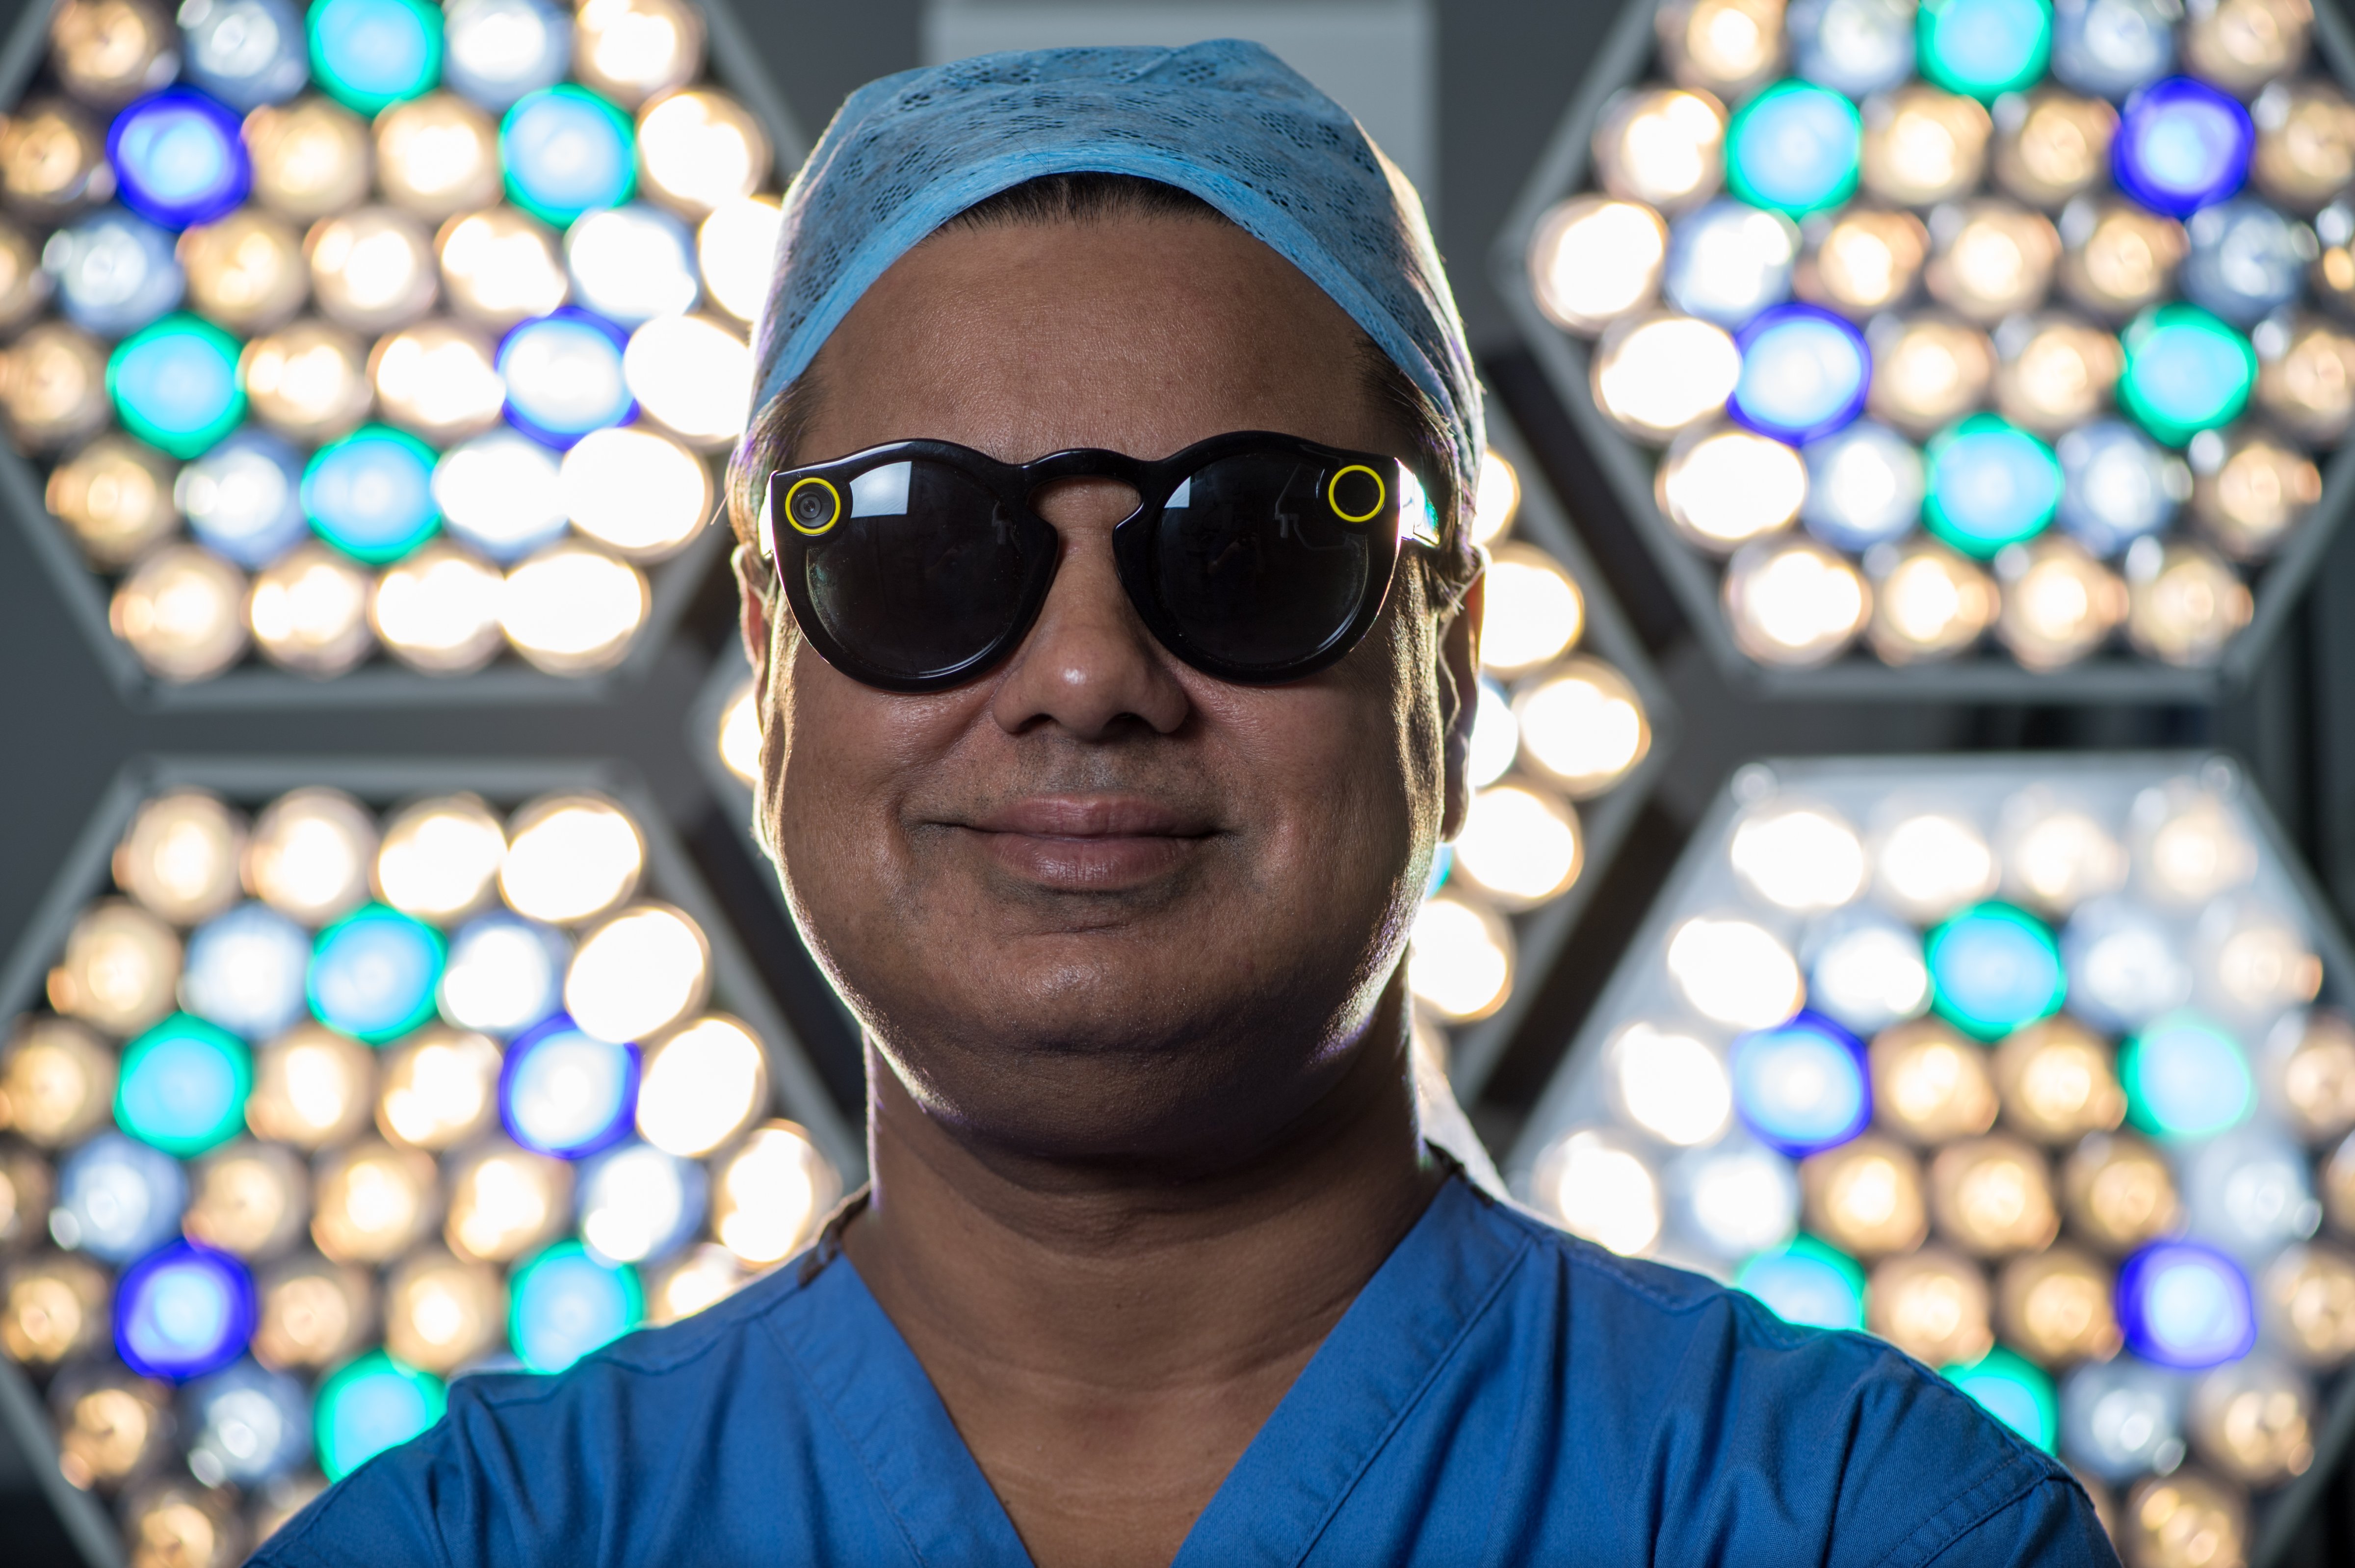 Surgeon Shafi Ahmed poses for a photograph wearing a pair of Snap Inc. Spectacles inside his operating theater at the Royal London Hospital, part of the Barts Health NHS Trust, in London, U.K., on Thursday, Jan. 11, 2018. (Chris J. Ratcliffe—Bloomberg/Getty Images)